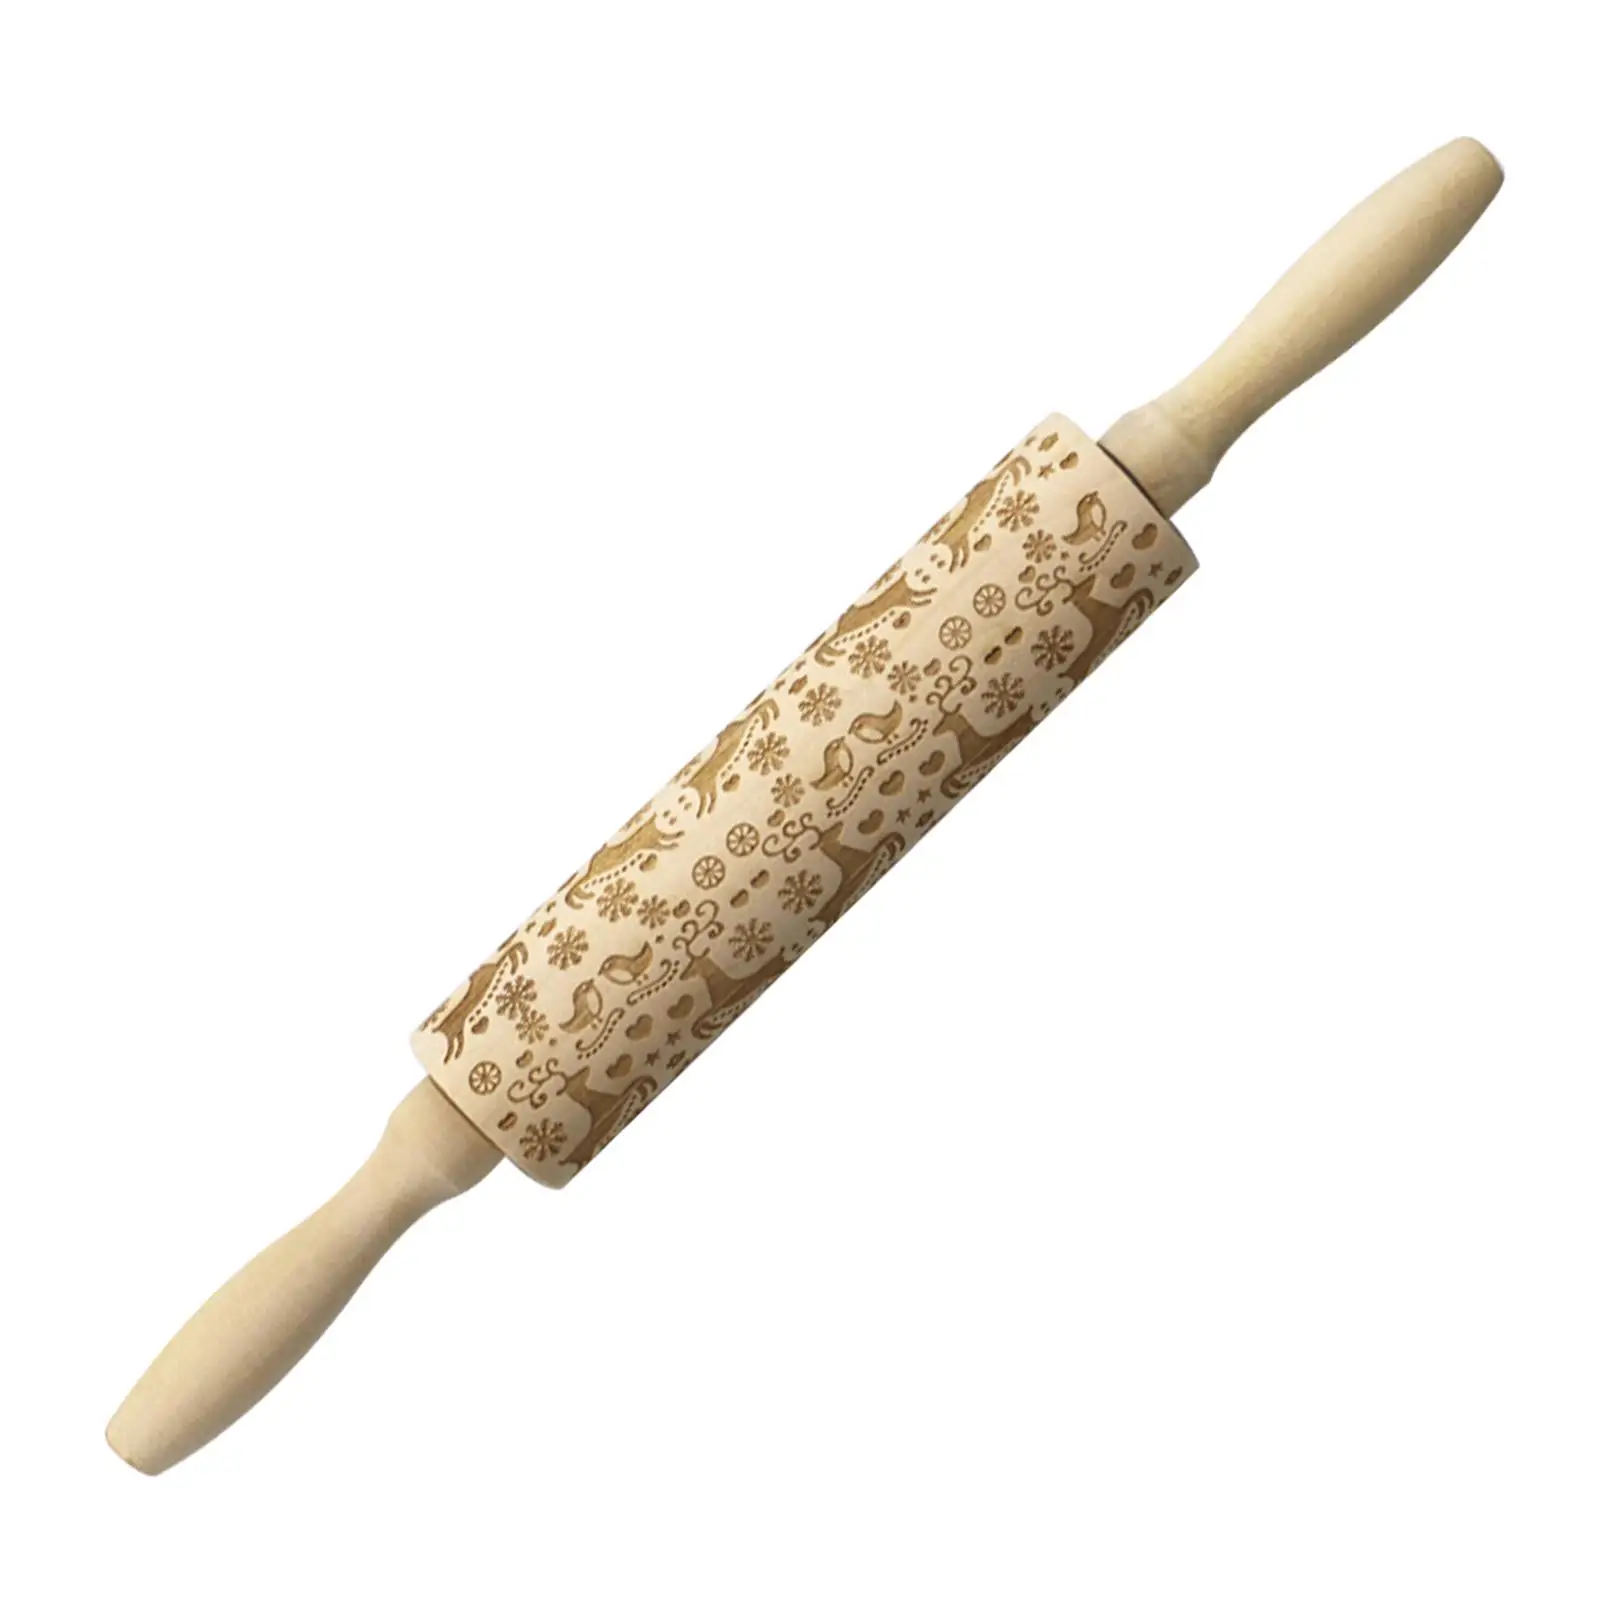 Embossed Rolling Pin Xmas Kitchen Tool for Baking to Decorate Pastries Bread